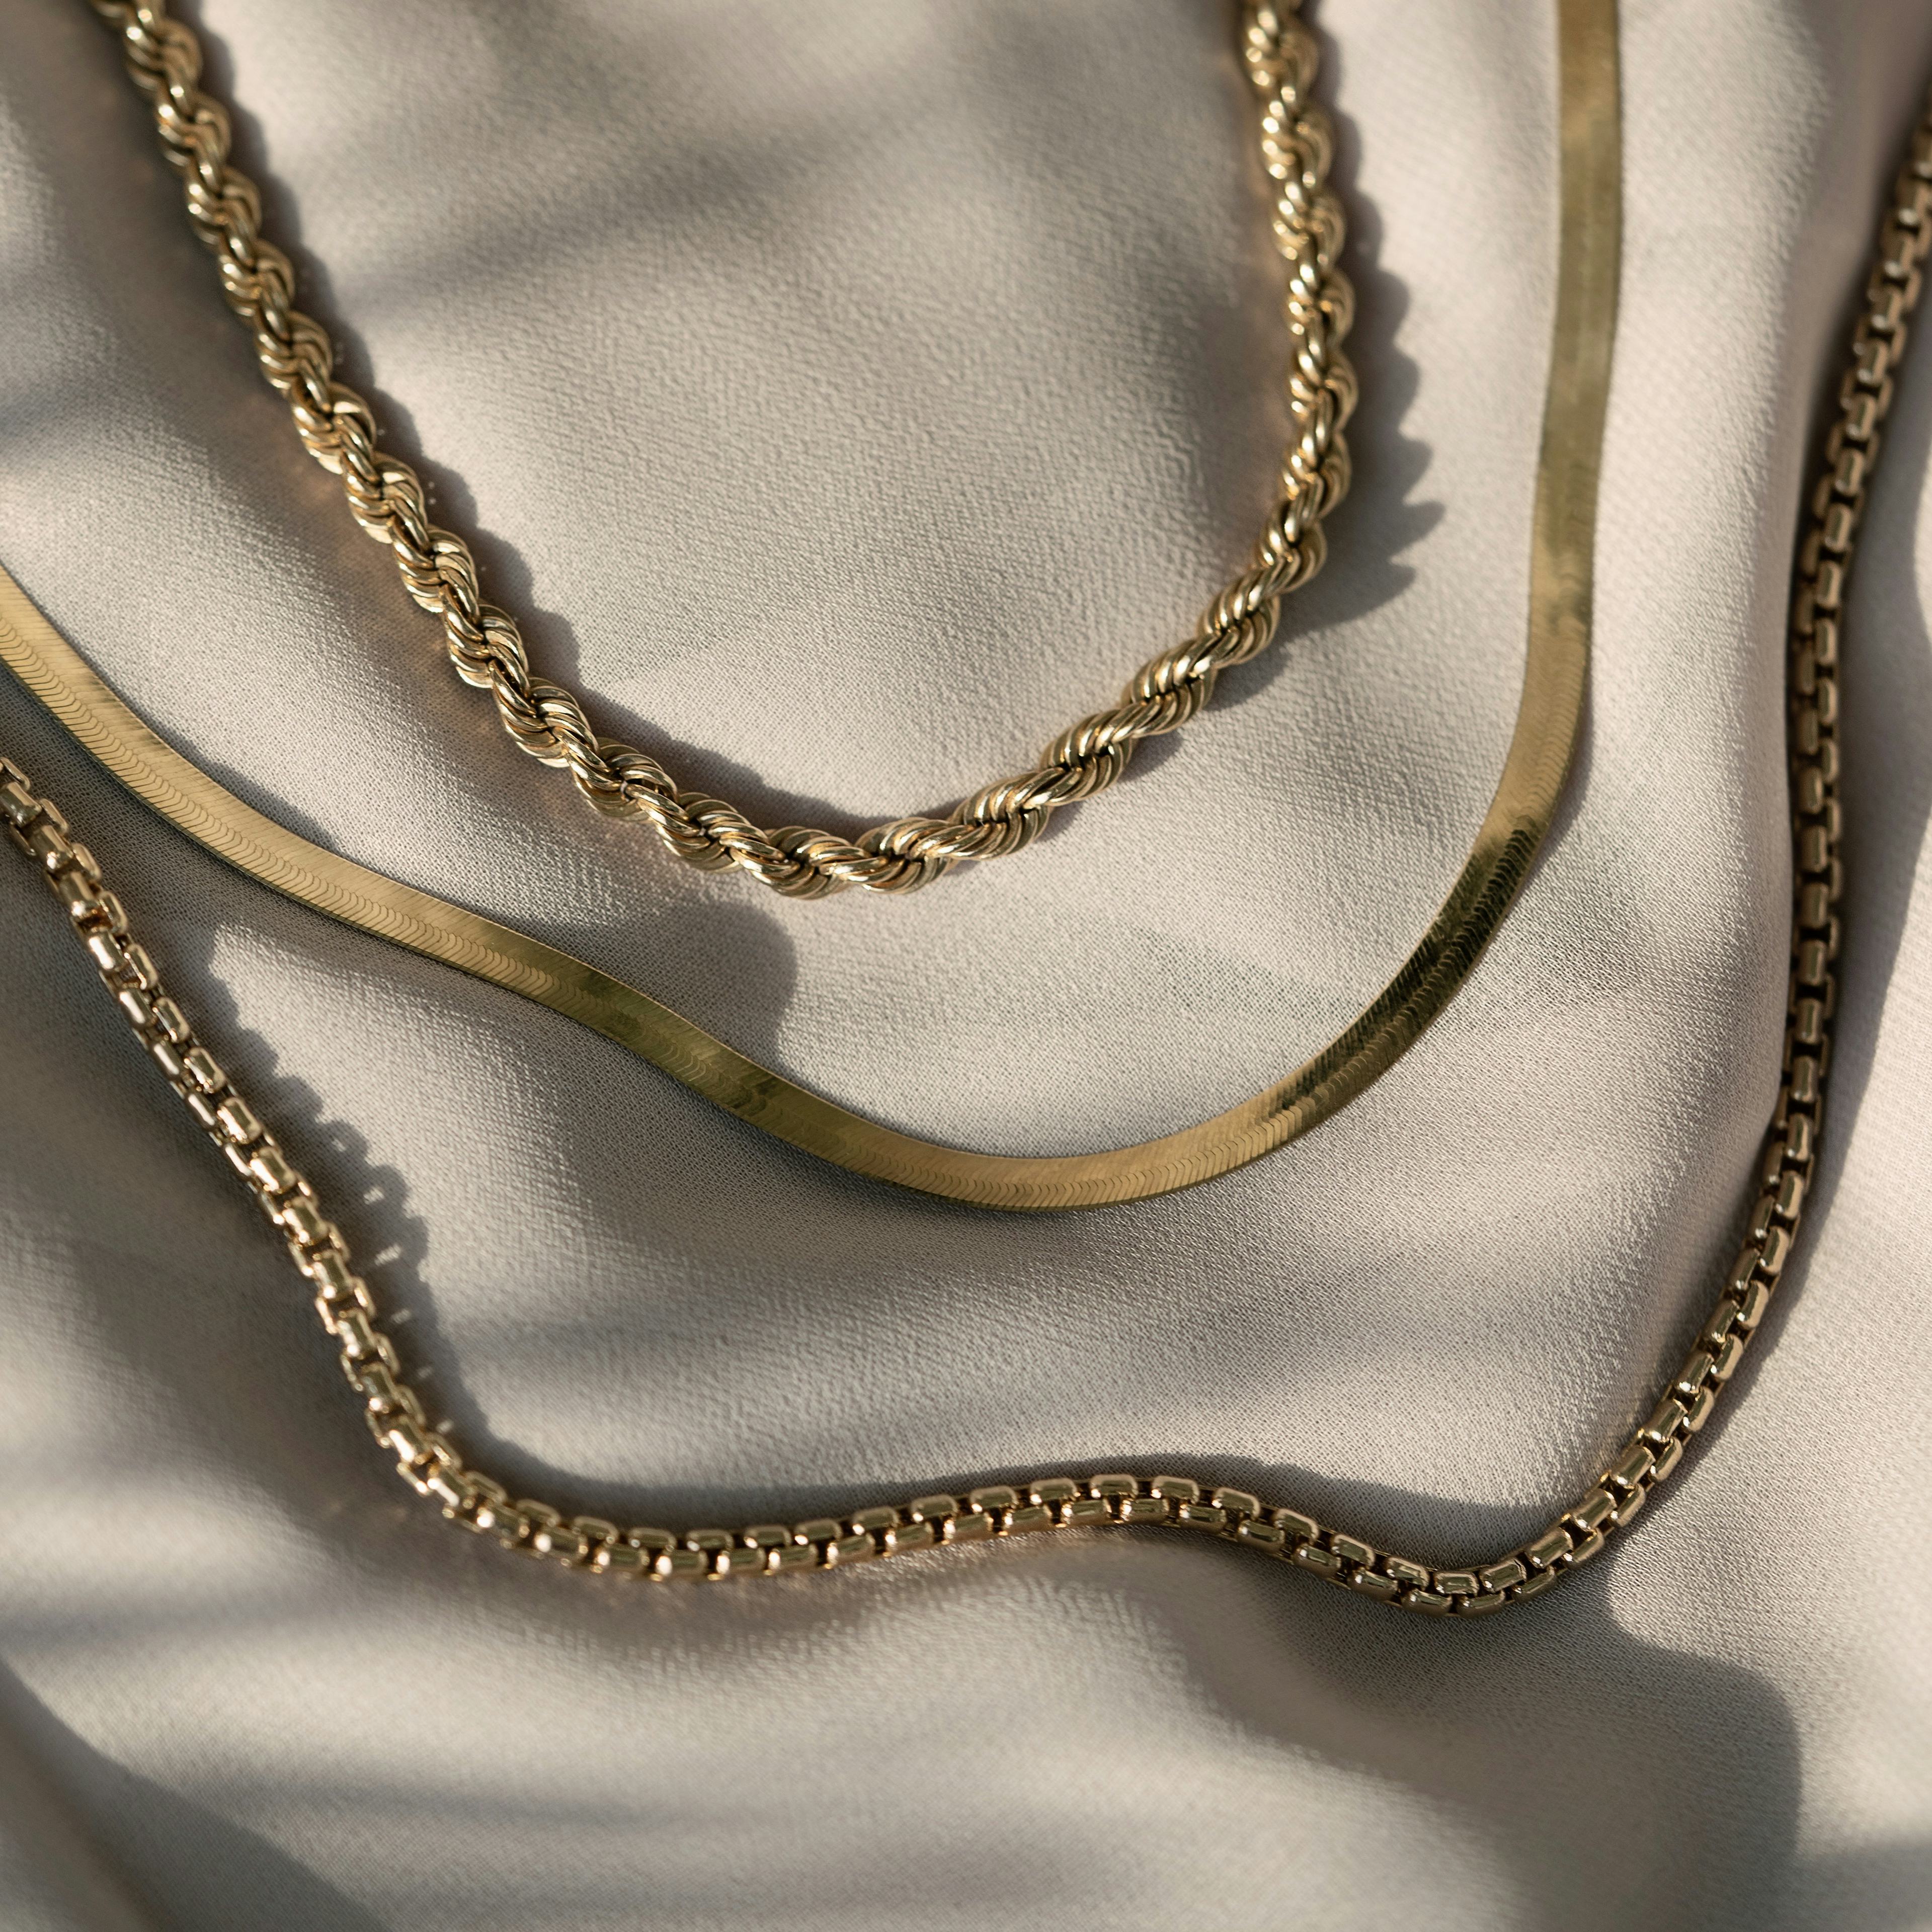 CHOOSE YOUR CHAIN: Whether it’s rope, herringbone or box, Zoe Chicco’s gold chains make for the perfect everyday layer. Tap the link in bio to shop at #AUBADEJEWELRY.